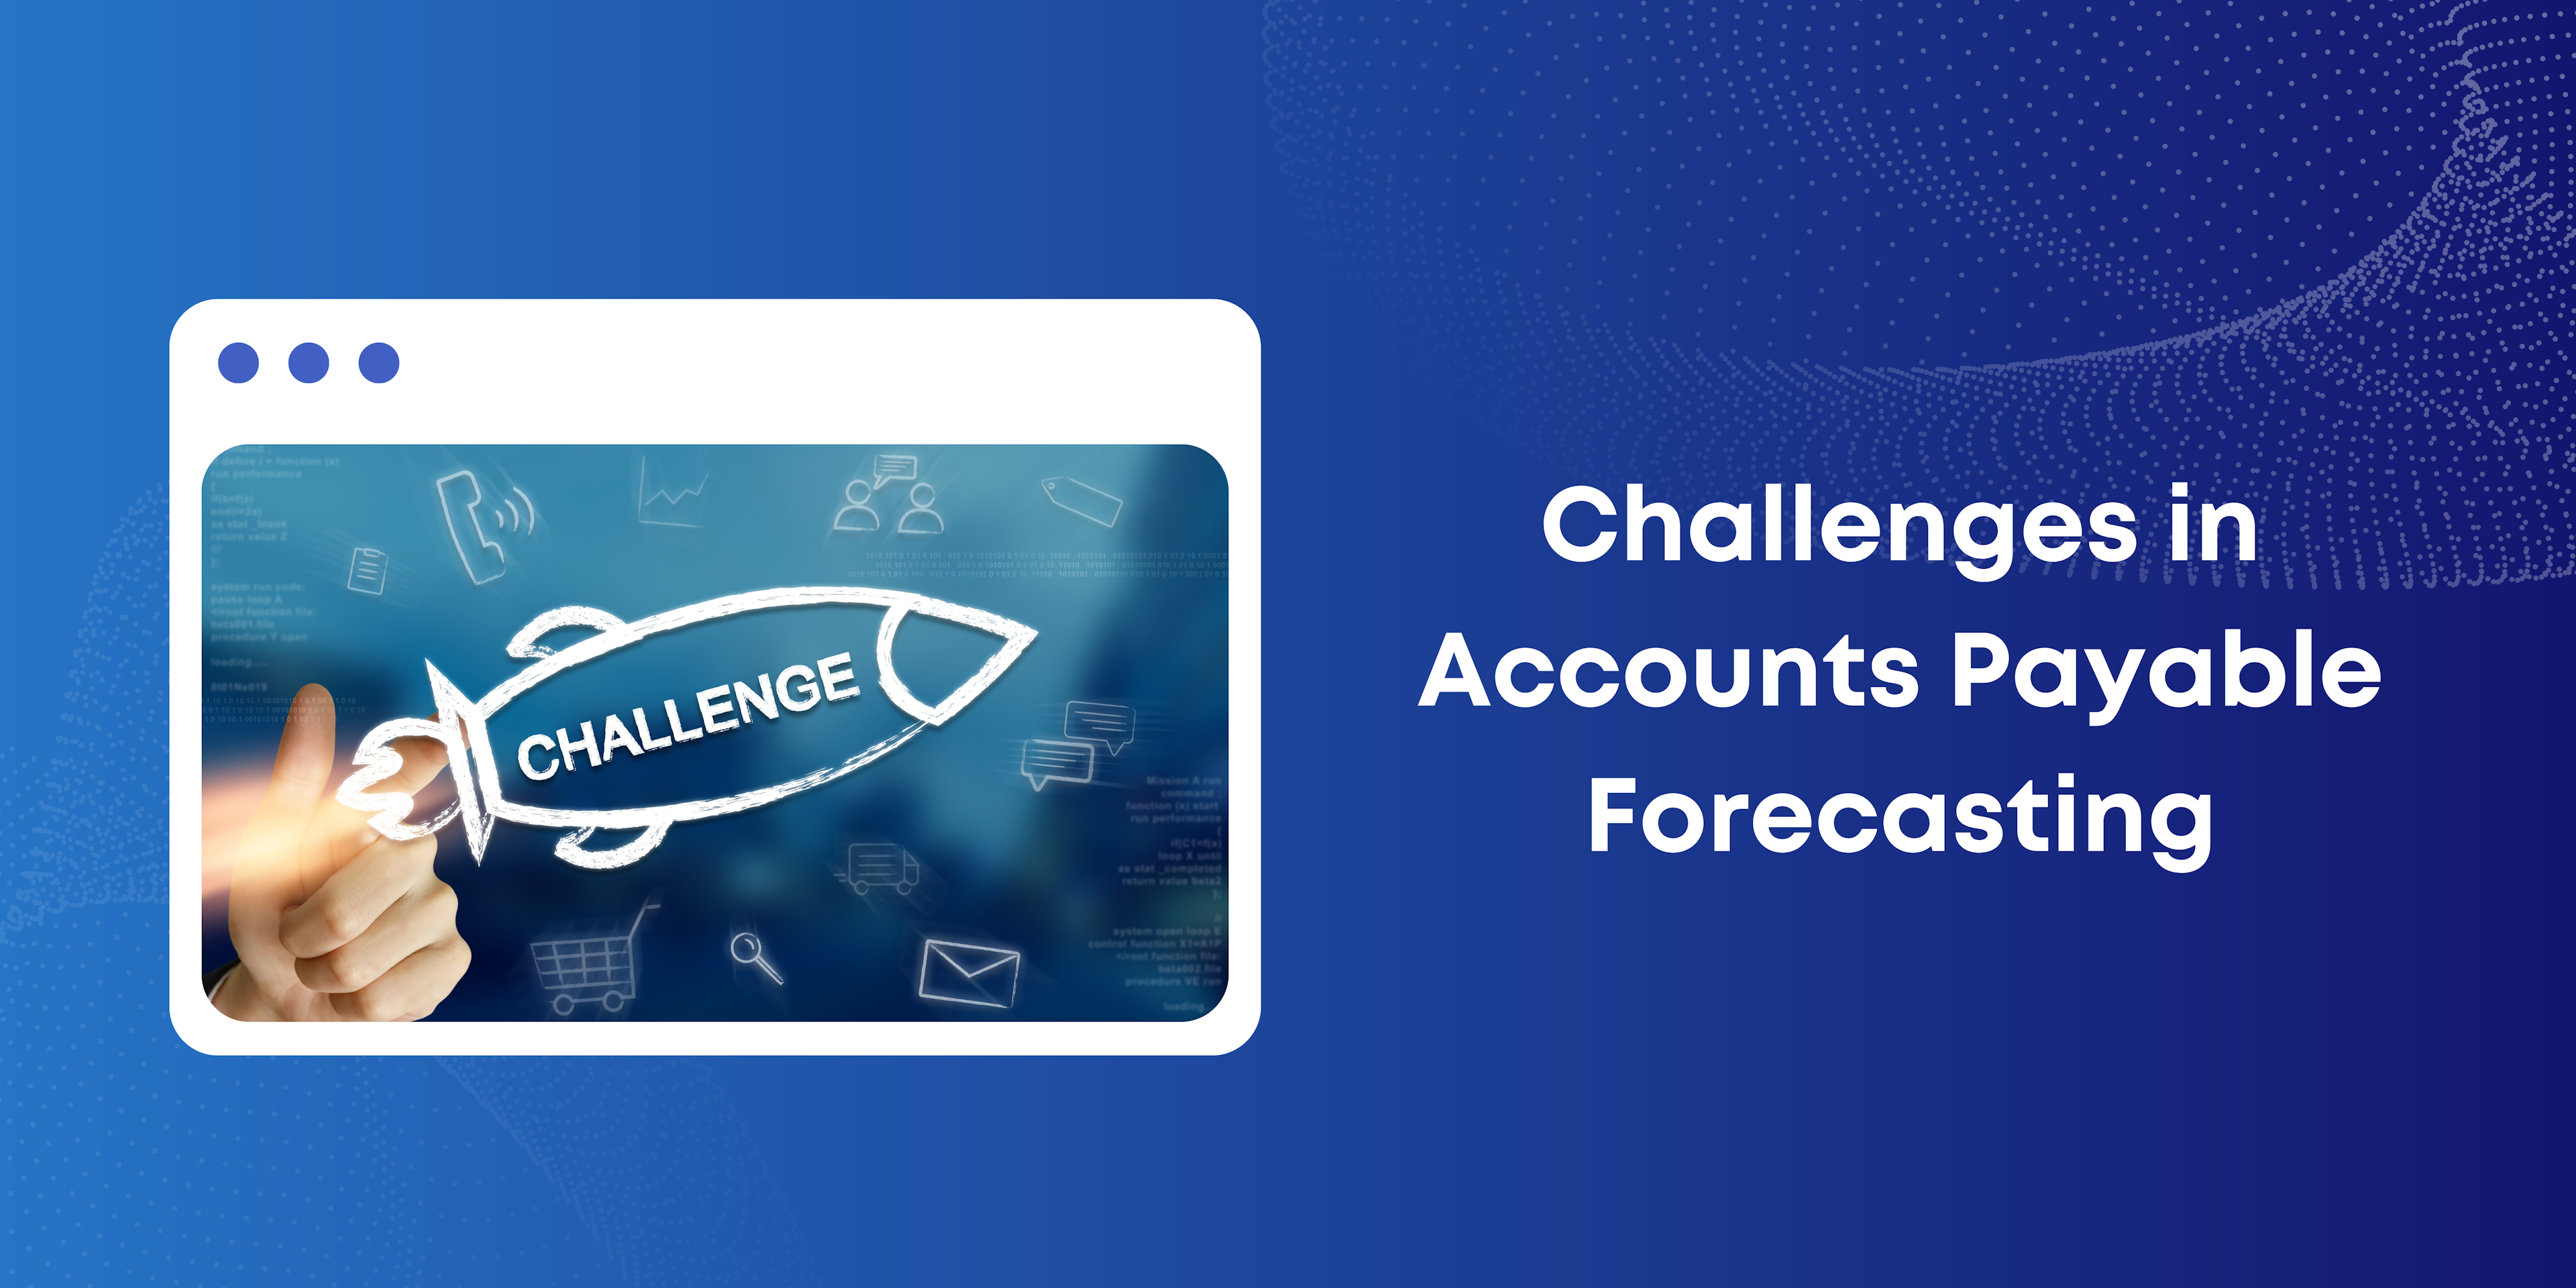 Challenges in Accounts Payable Forecasting